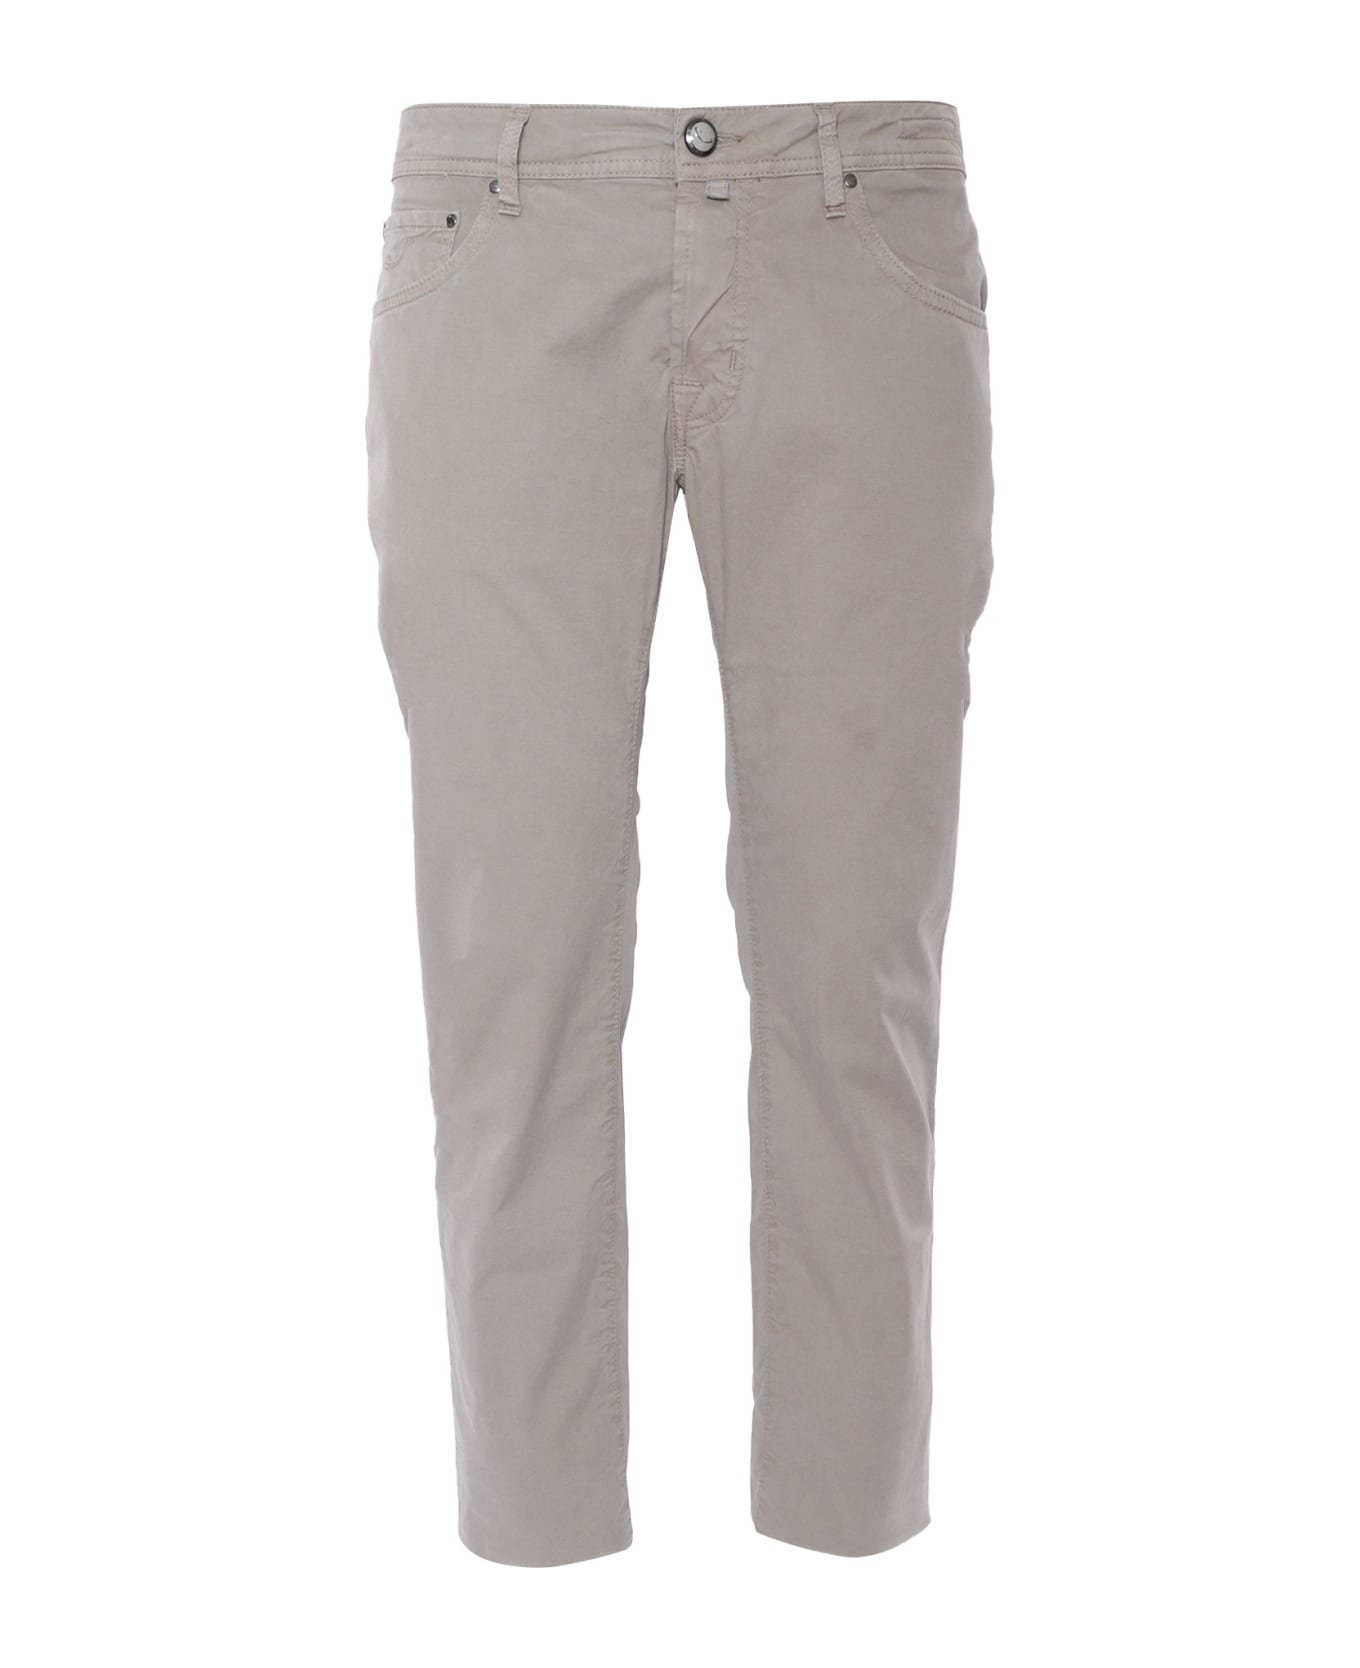 Jacob Cohen Brown 5 Pocket Trousers - BROWN ボトムス